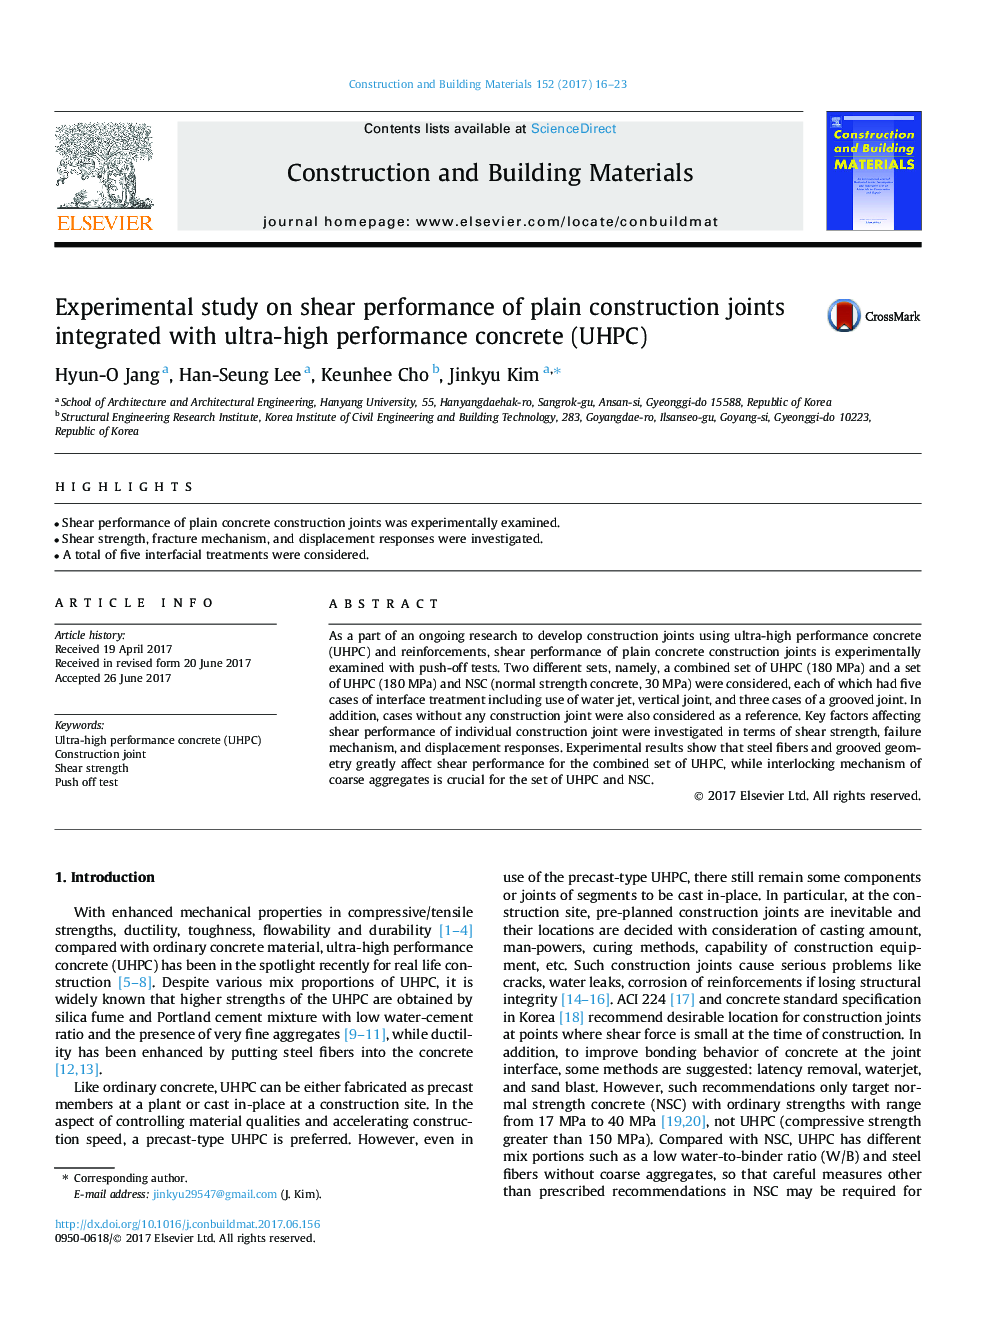 Experimental study on shear performance of plain construction joints integrated with ultra-high performance concrete (UHPC)